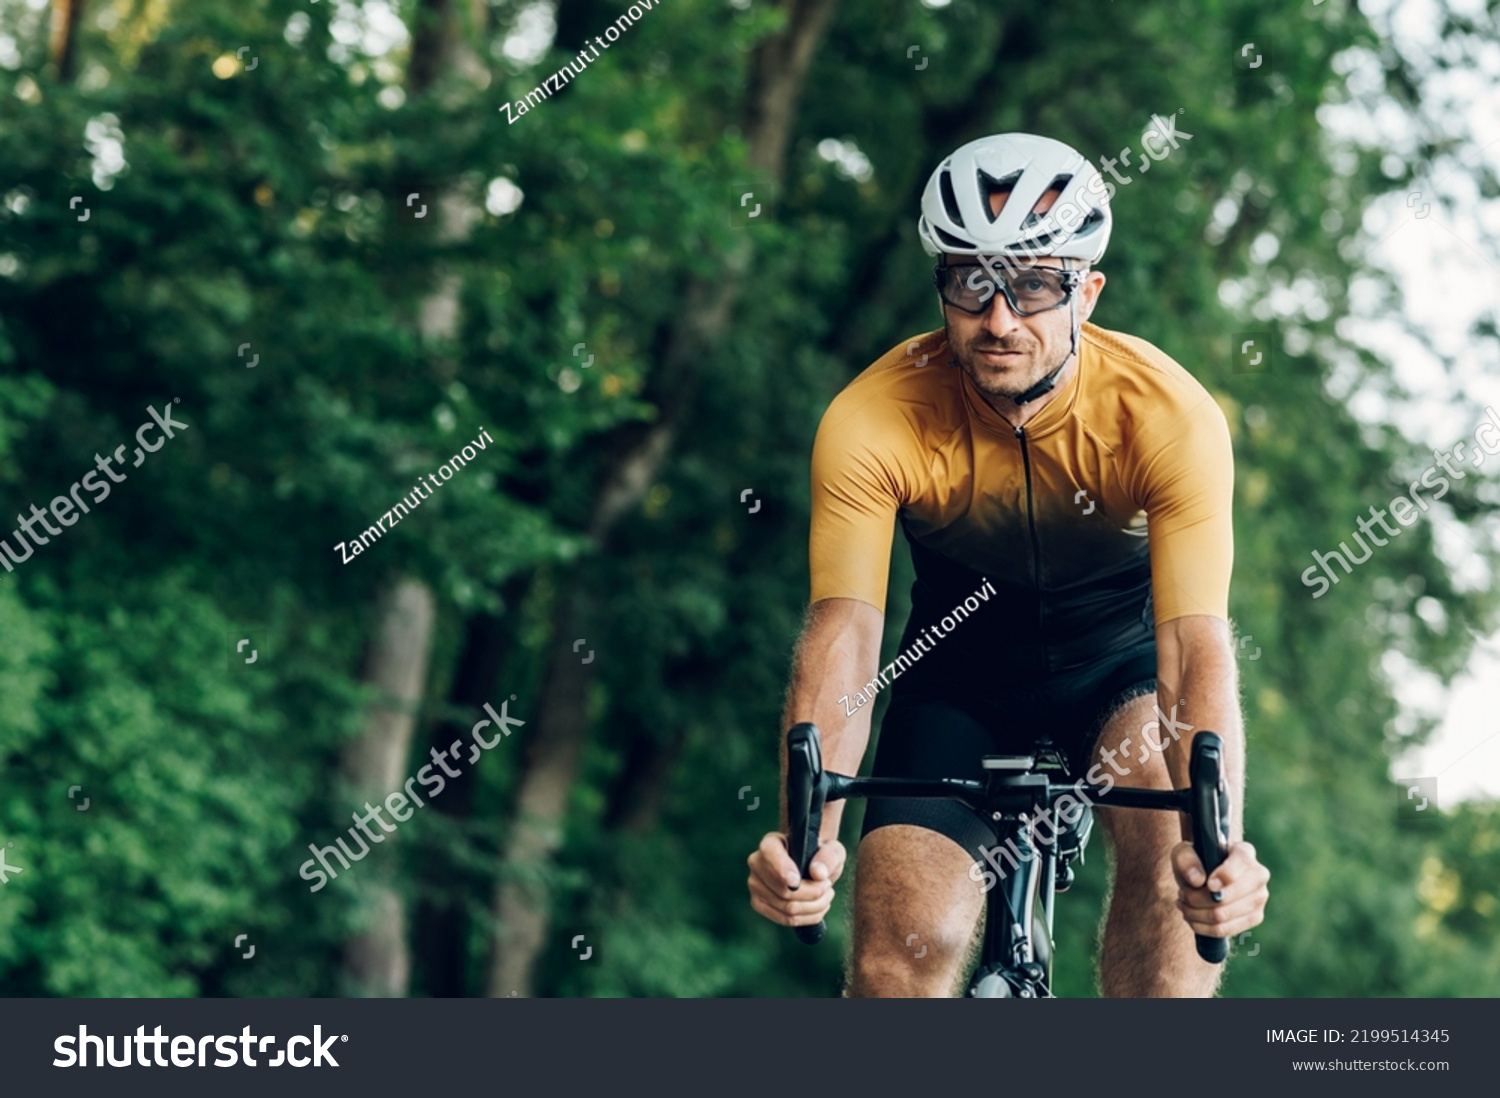 Sporty man wearing active wear and helmet riding a black bike in nature. Concept of people, workout and favorite hobby. Copy space. Looking into the camera. #2199514345